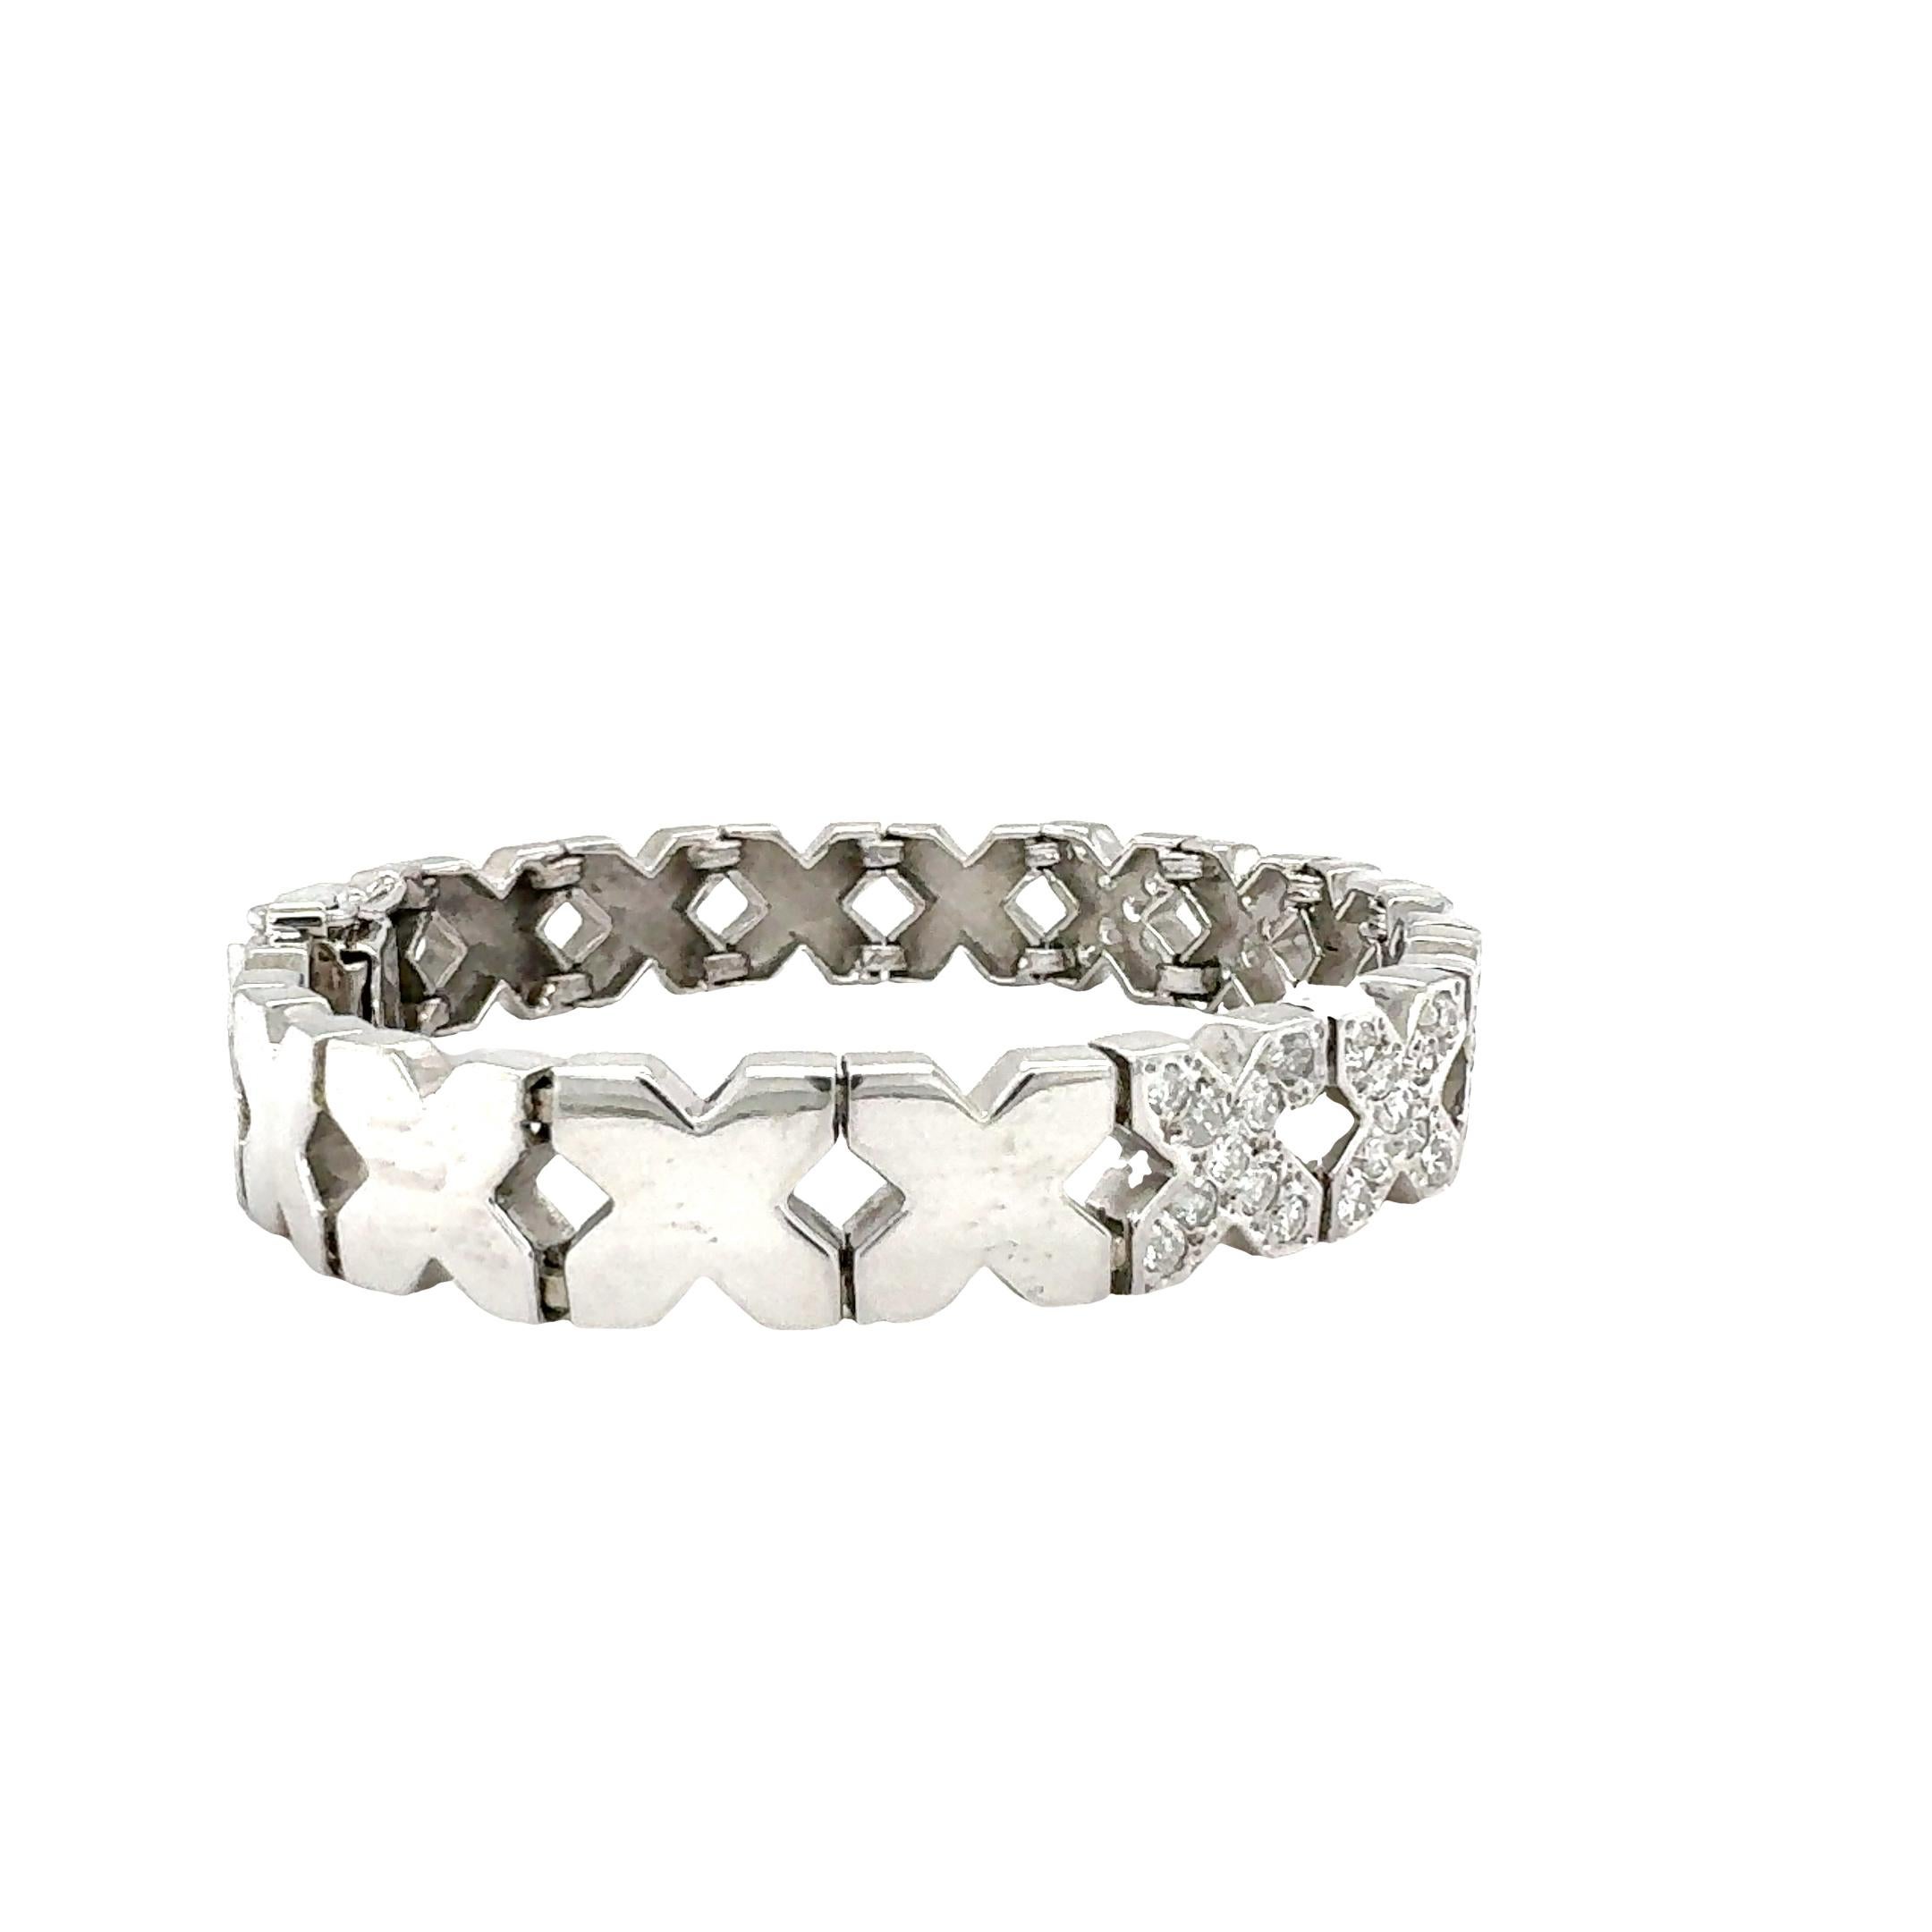 14K White Gold Diamond Link Bracelet In Good Condition For Sale In Beverly Hills, CA